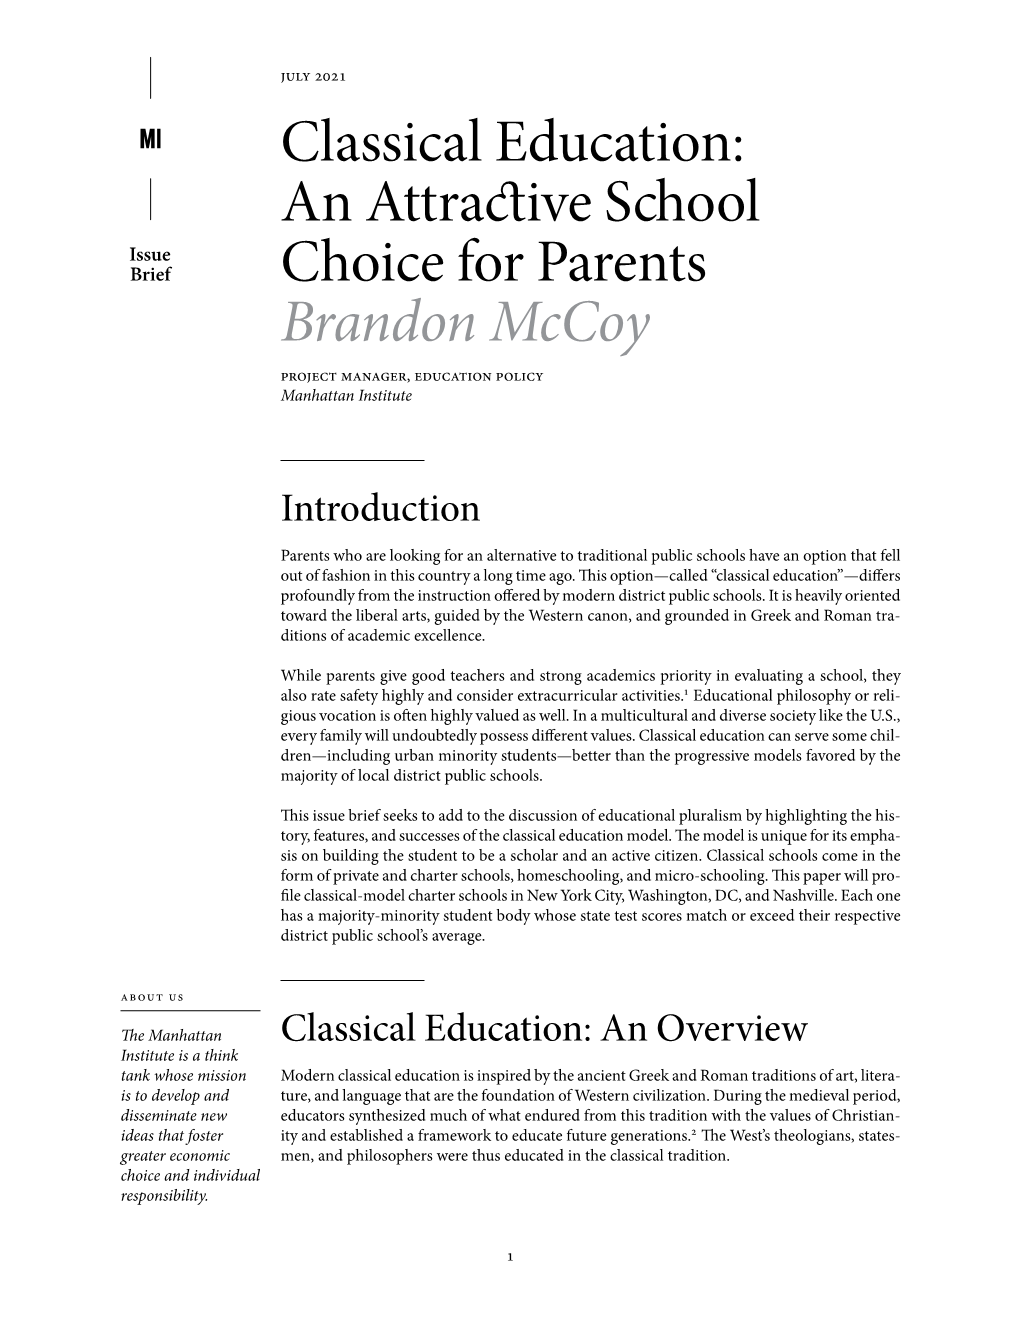 Classical Education: an Attractive School Issue Brief Choice for Parents Brandon Mccoy Project Manager, Education Policy Manhattan Institute